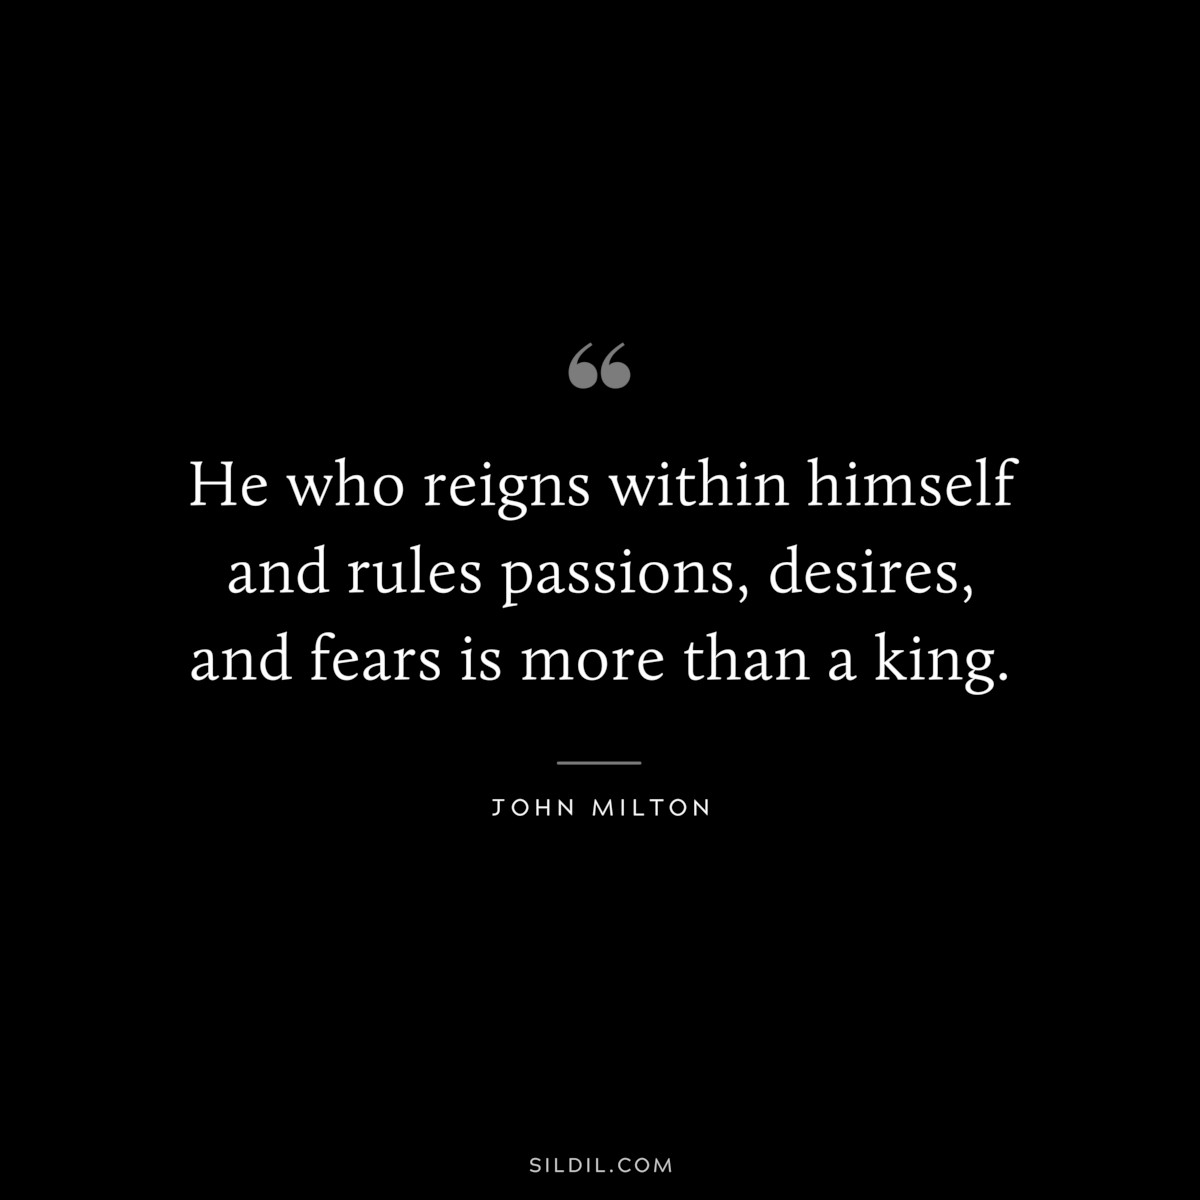 He who reigns within himself and rules passions, desires, and fears is more than a king. ― John Milton